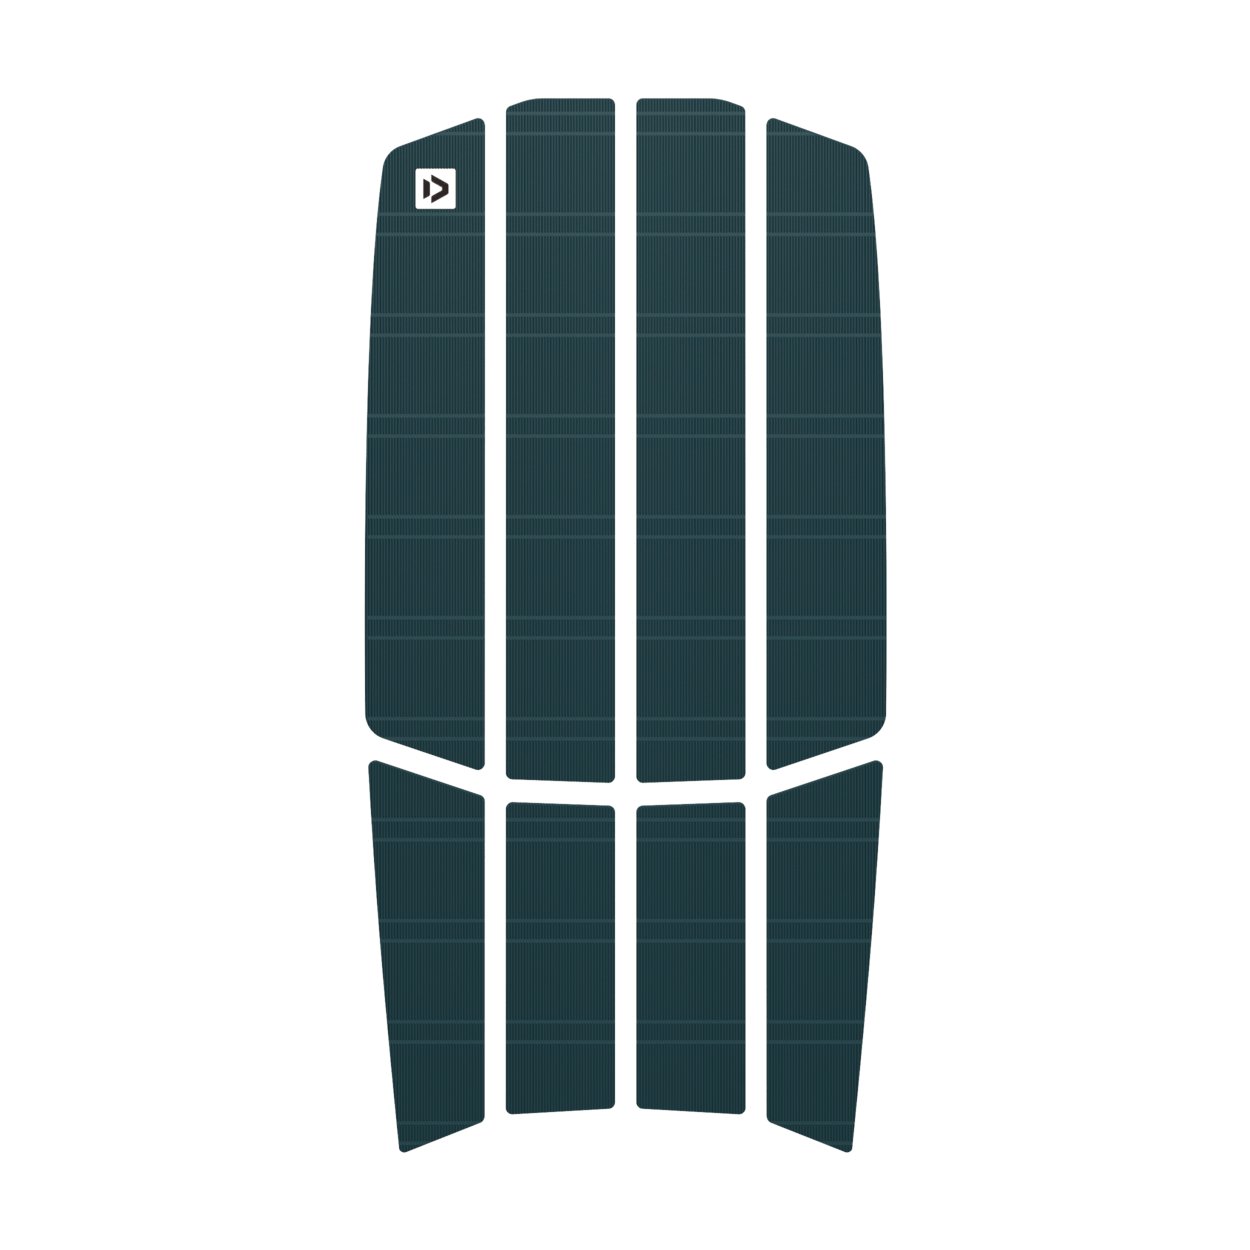 Duotone Traction Pad Team Front 2023 - Worthing Watersports - 9008415856251 - Surfboards - Duotone Kiteboarding